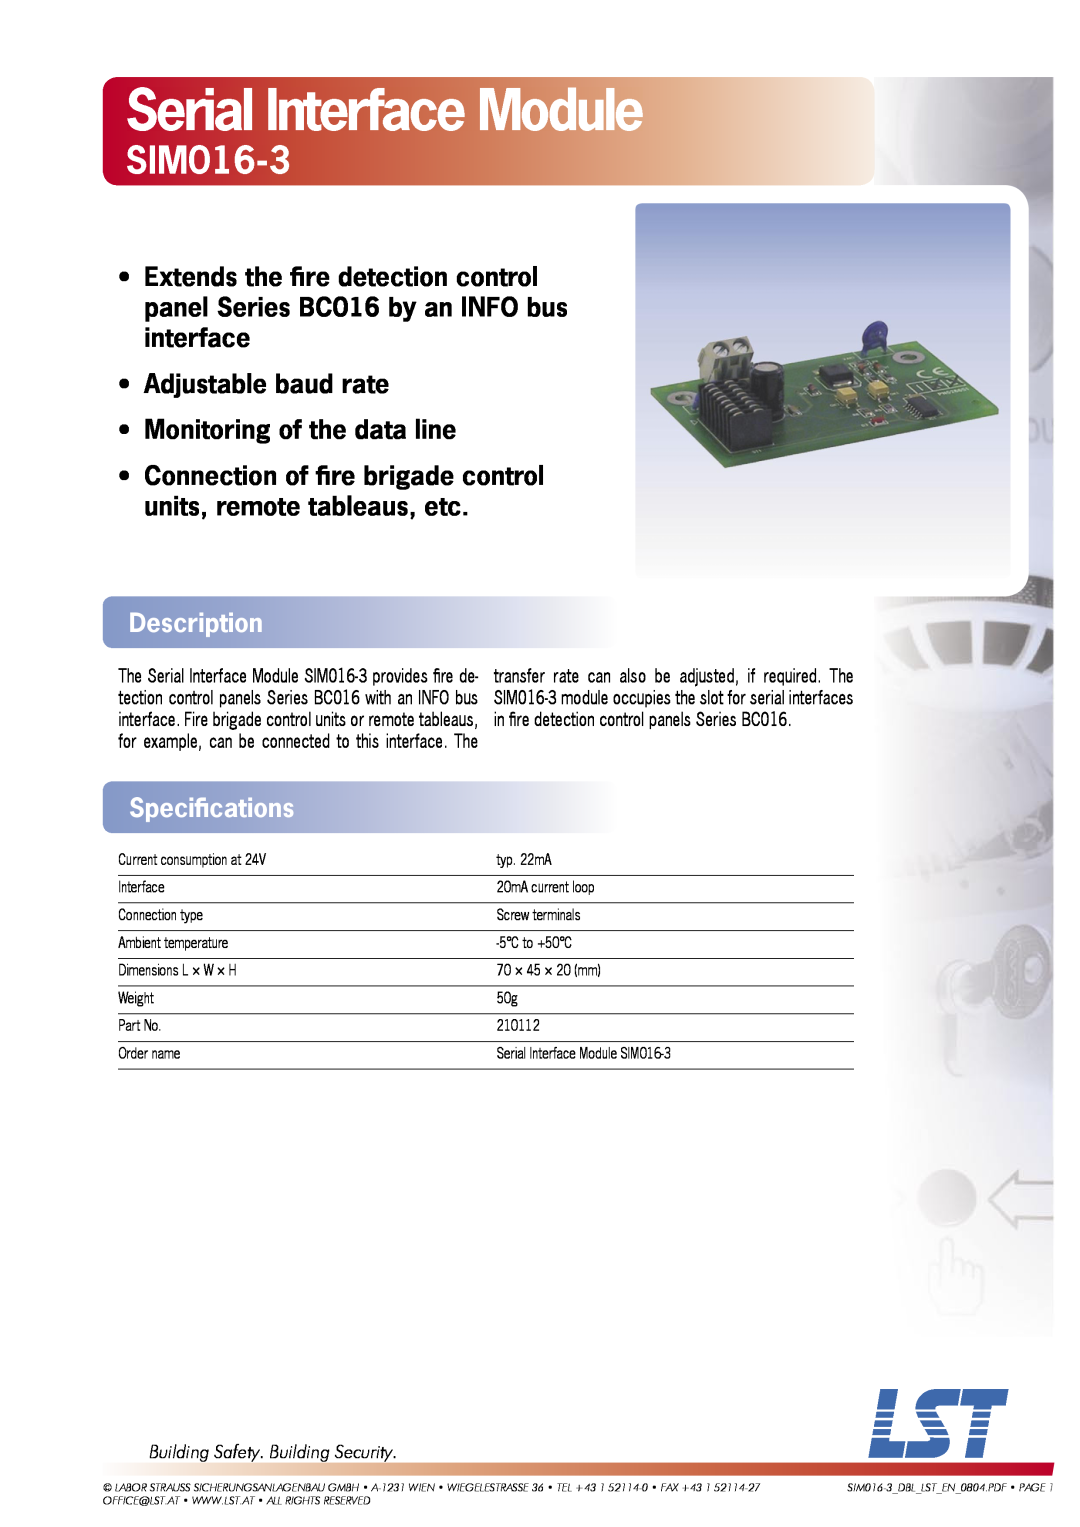 LST SIM016-3 specifications Serial Interface Module, Adjustable baud rate, Monitoring of the data line, Description 